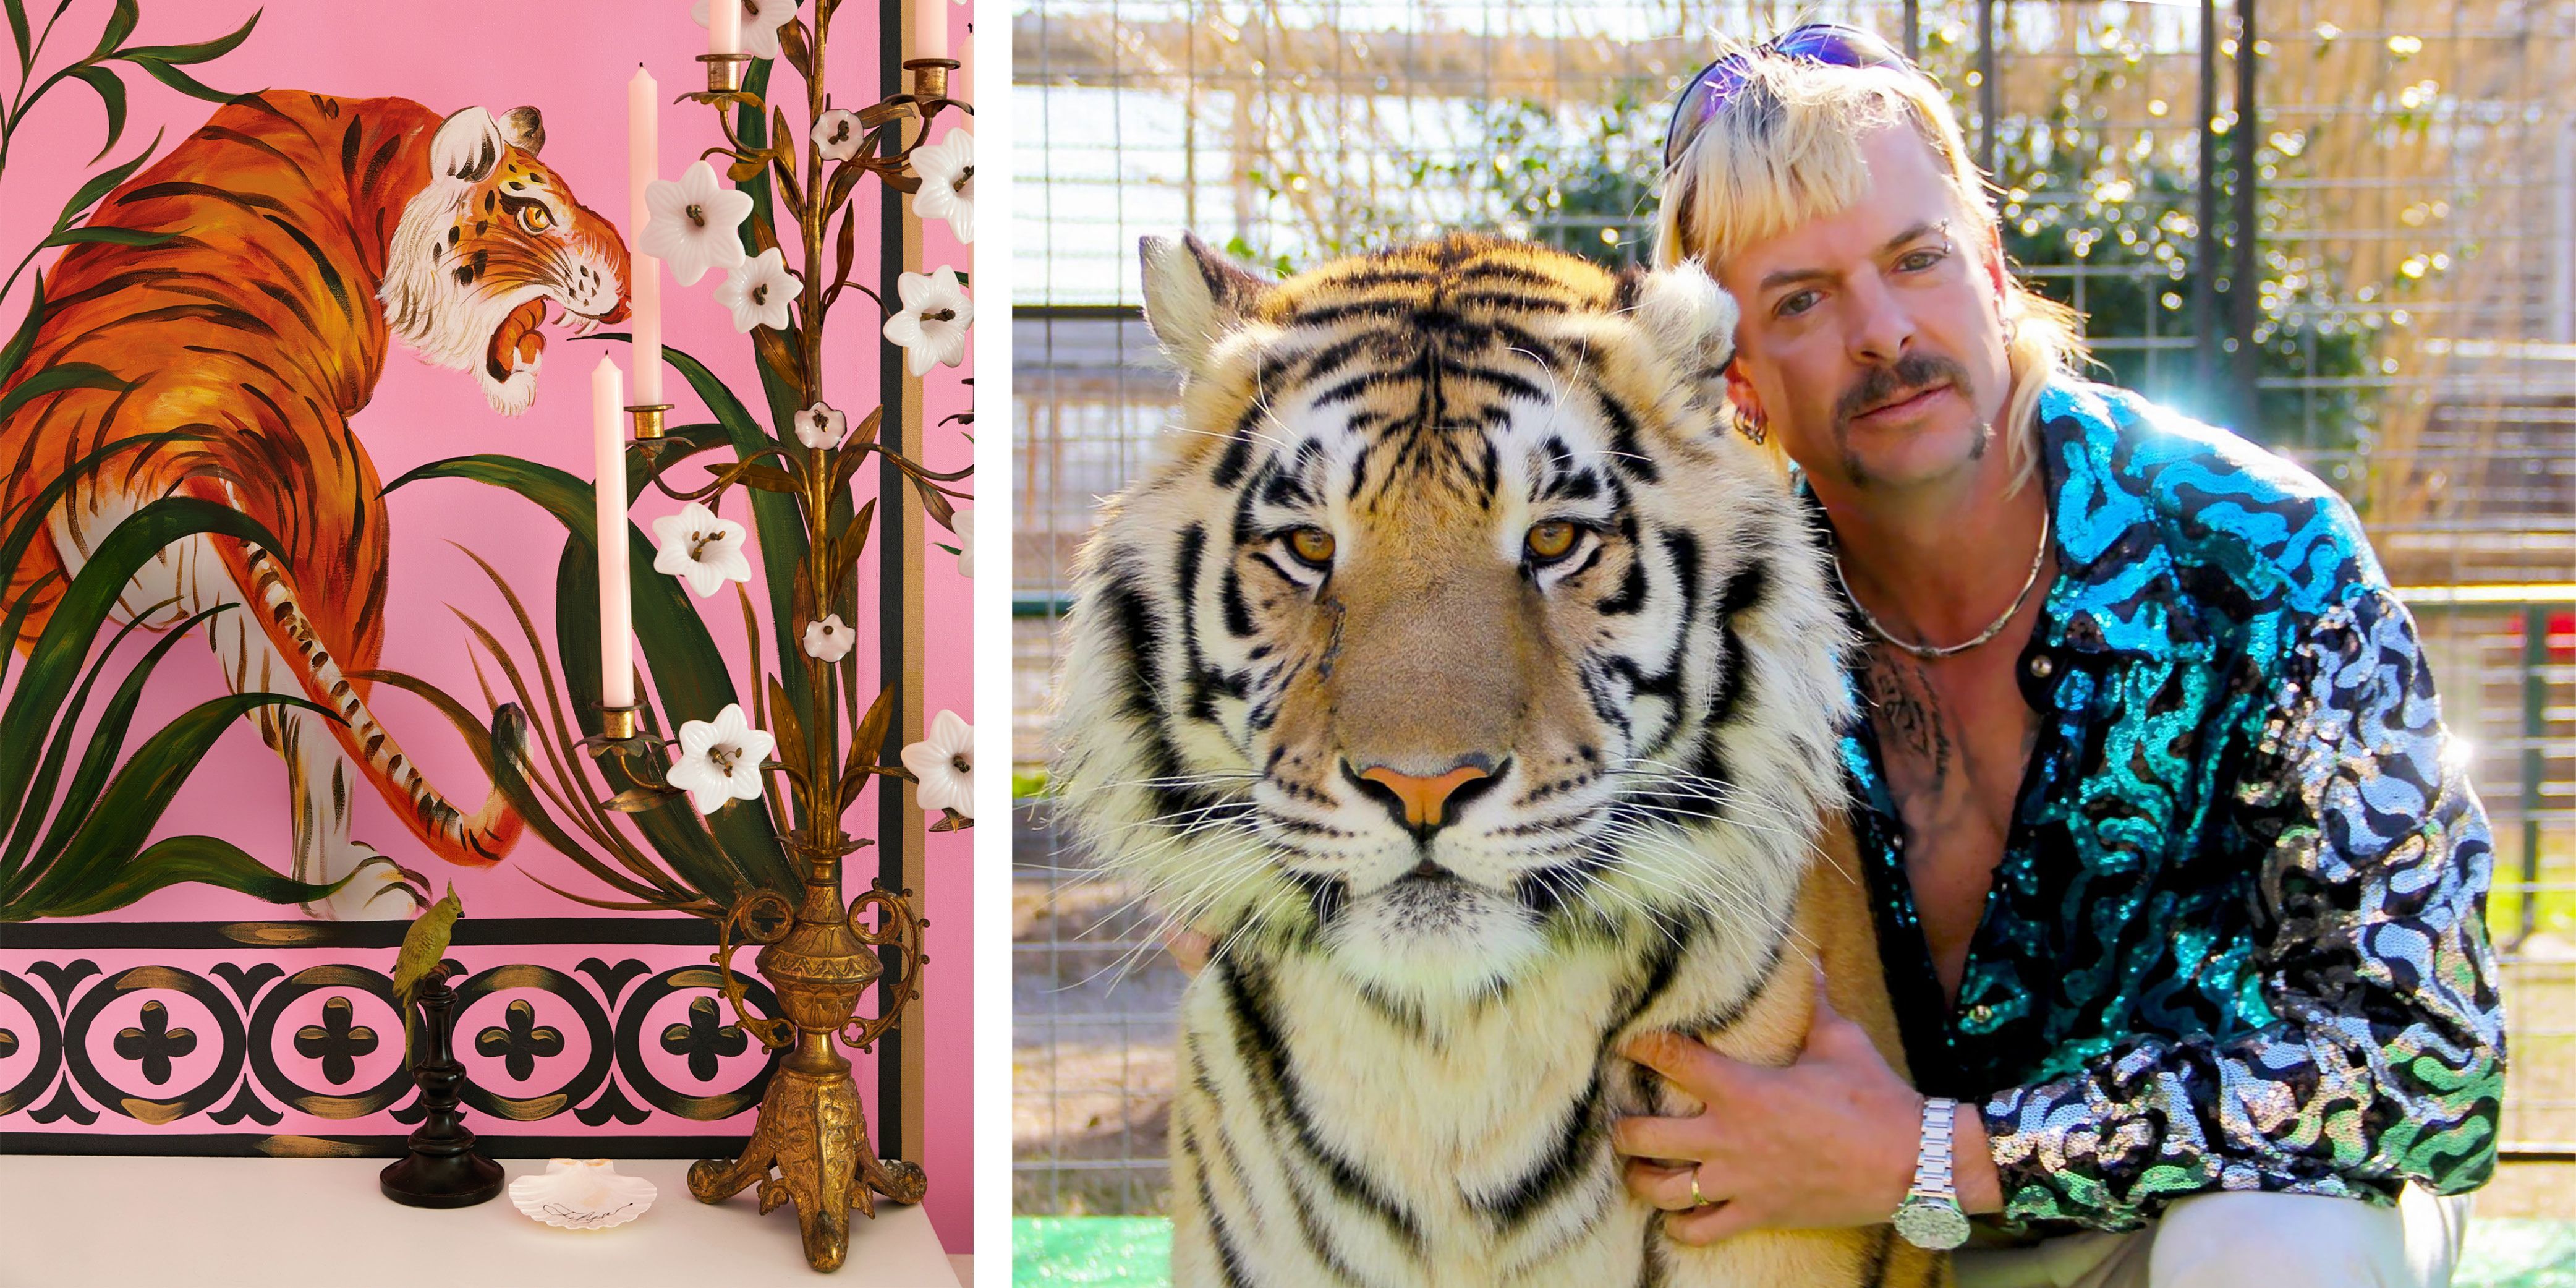 Tiger King' Home Decor Animal Prints Inspired by the Netflix Show